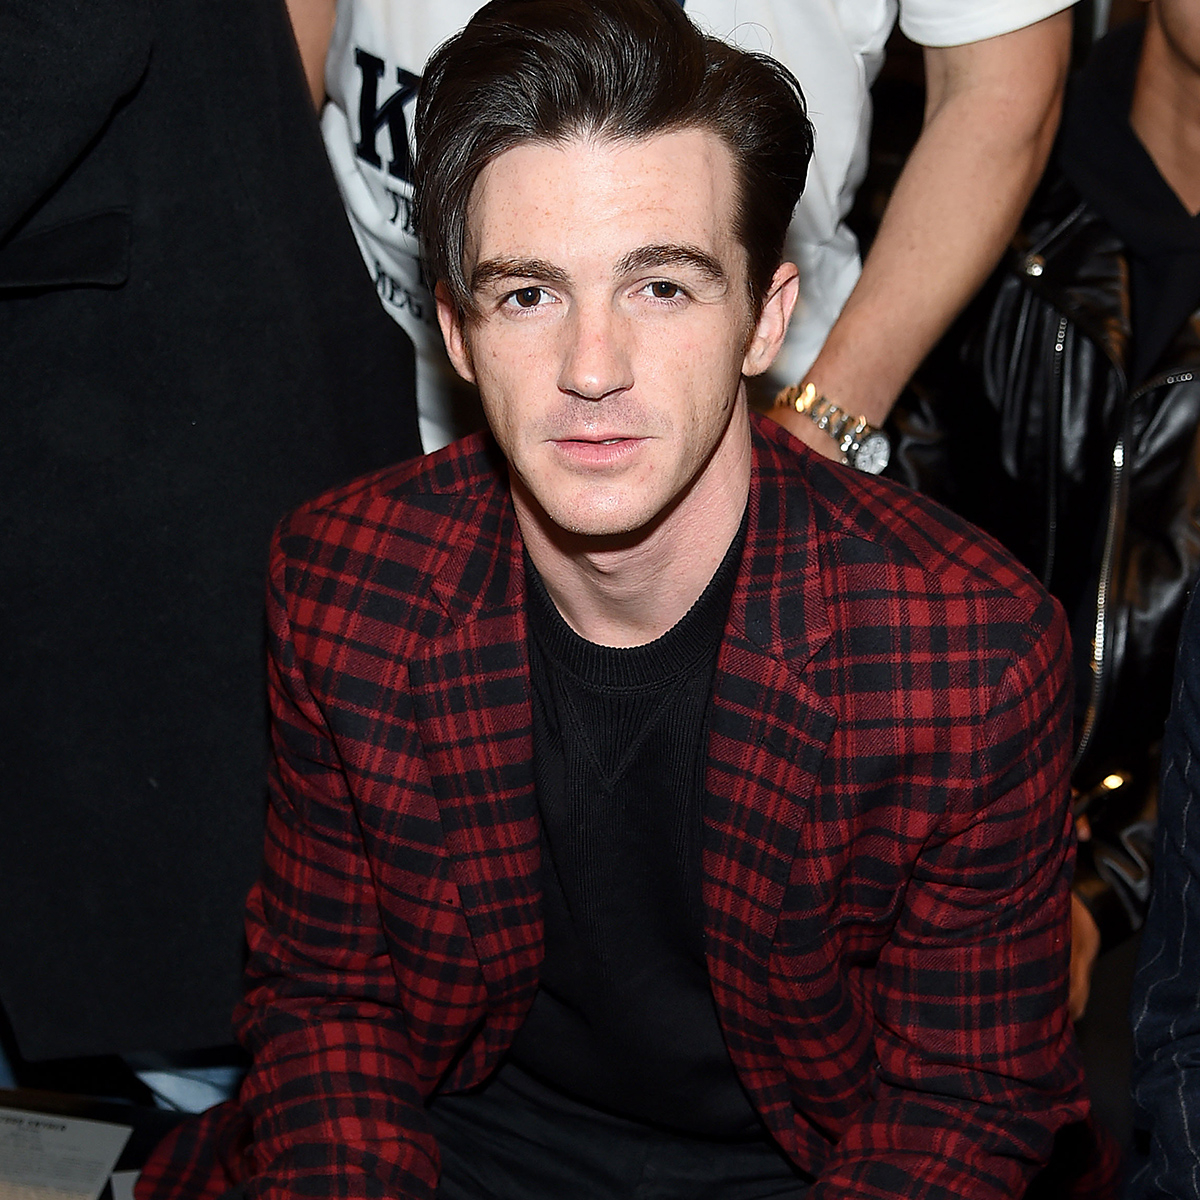 Drake Bell Details “Gruesome” Abuse Amid Quiet…